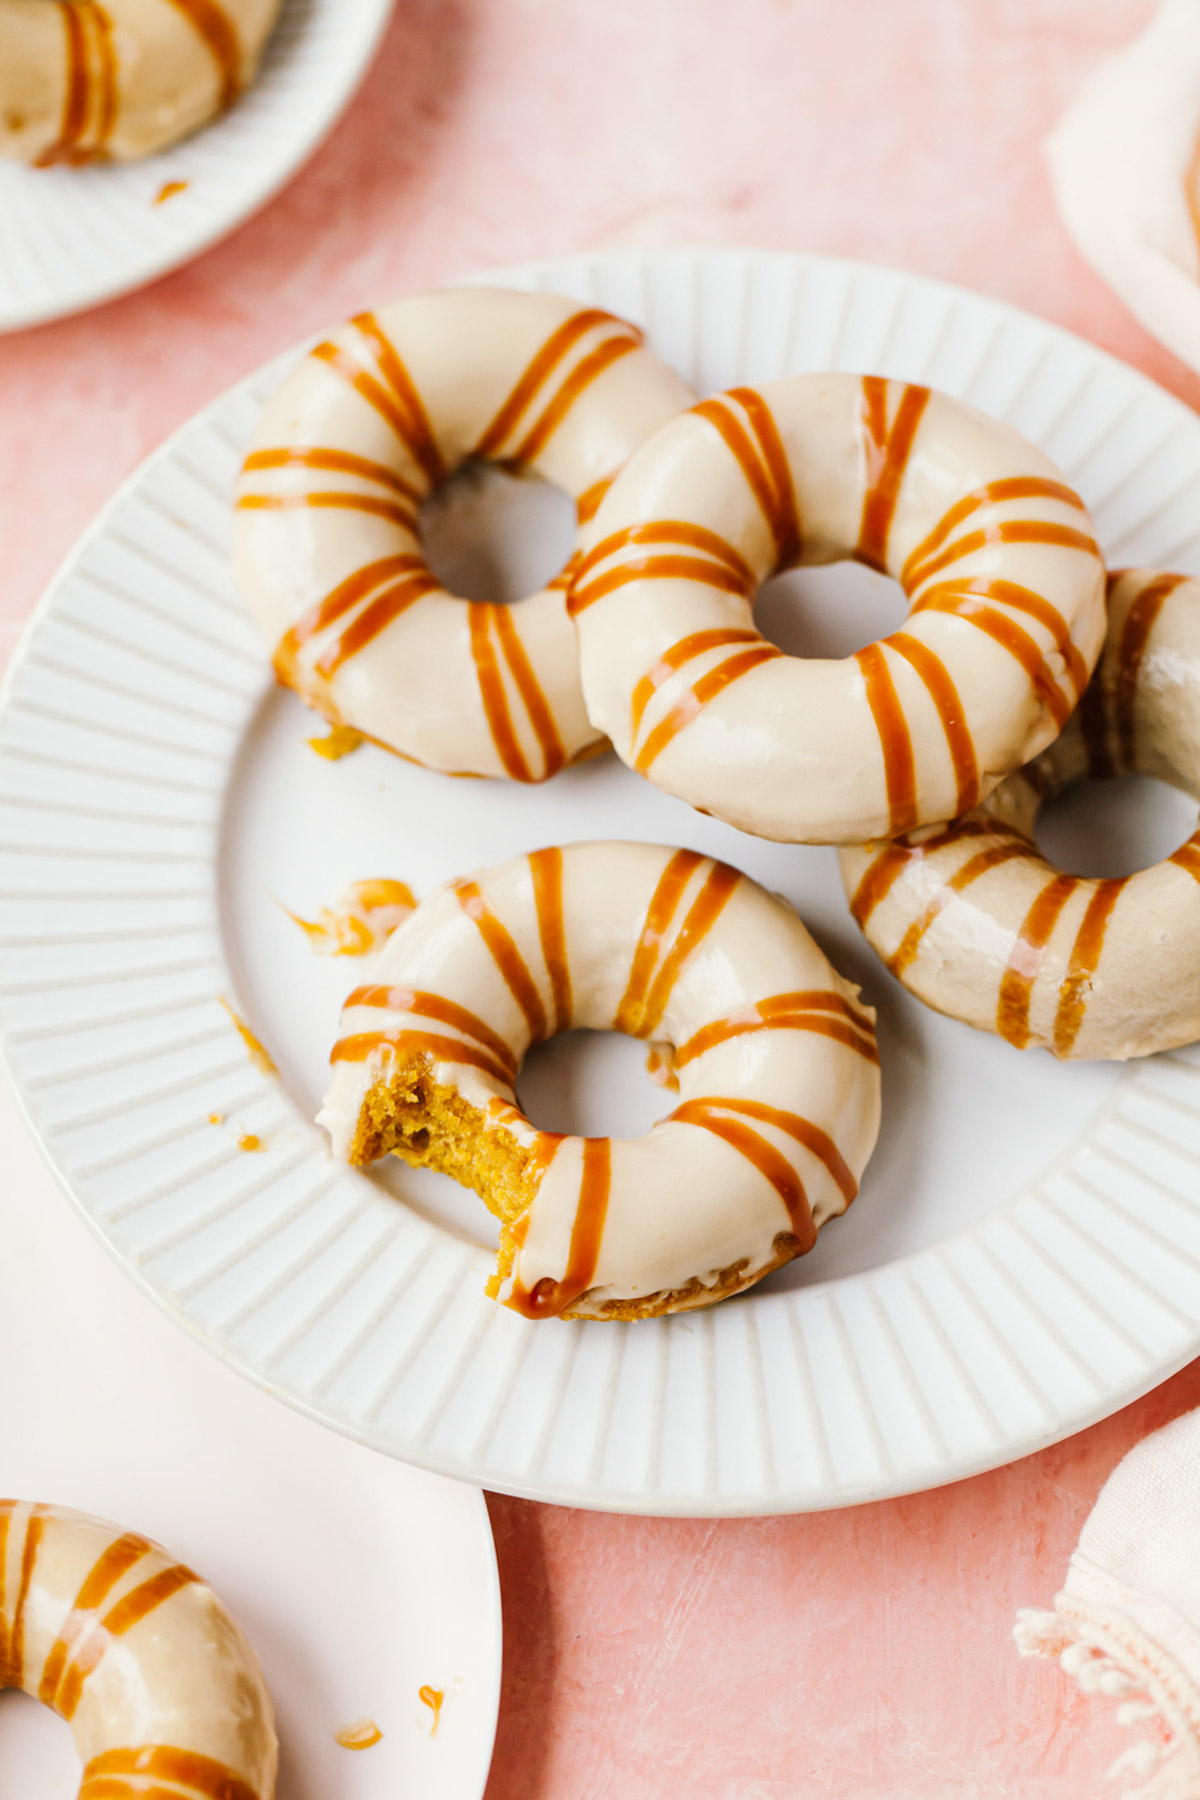 A plate of pumpkin donuts with caramel glaze on top